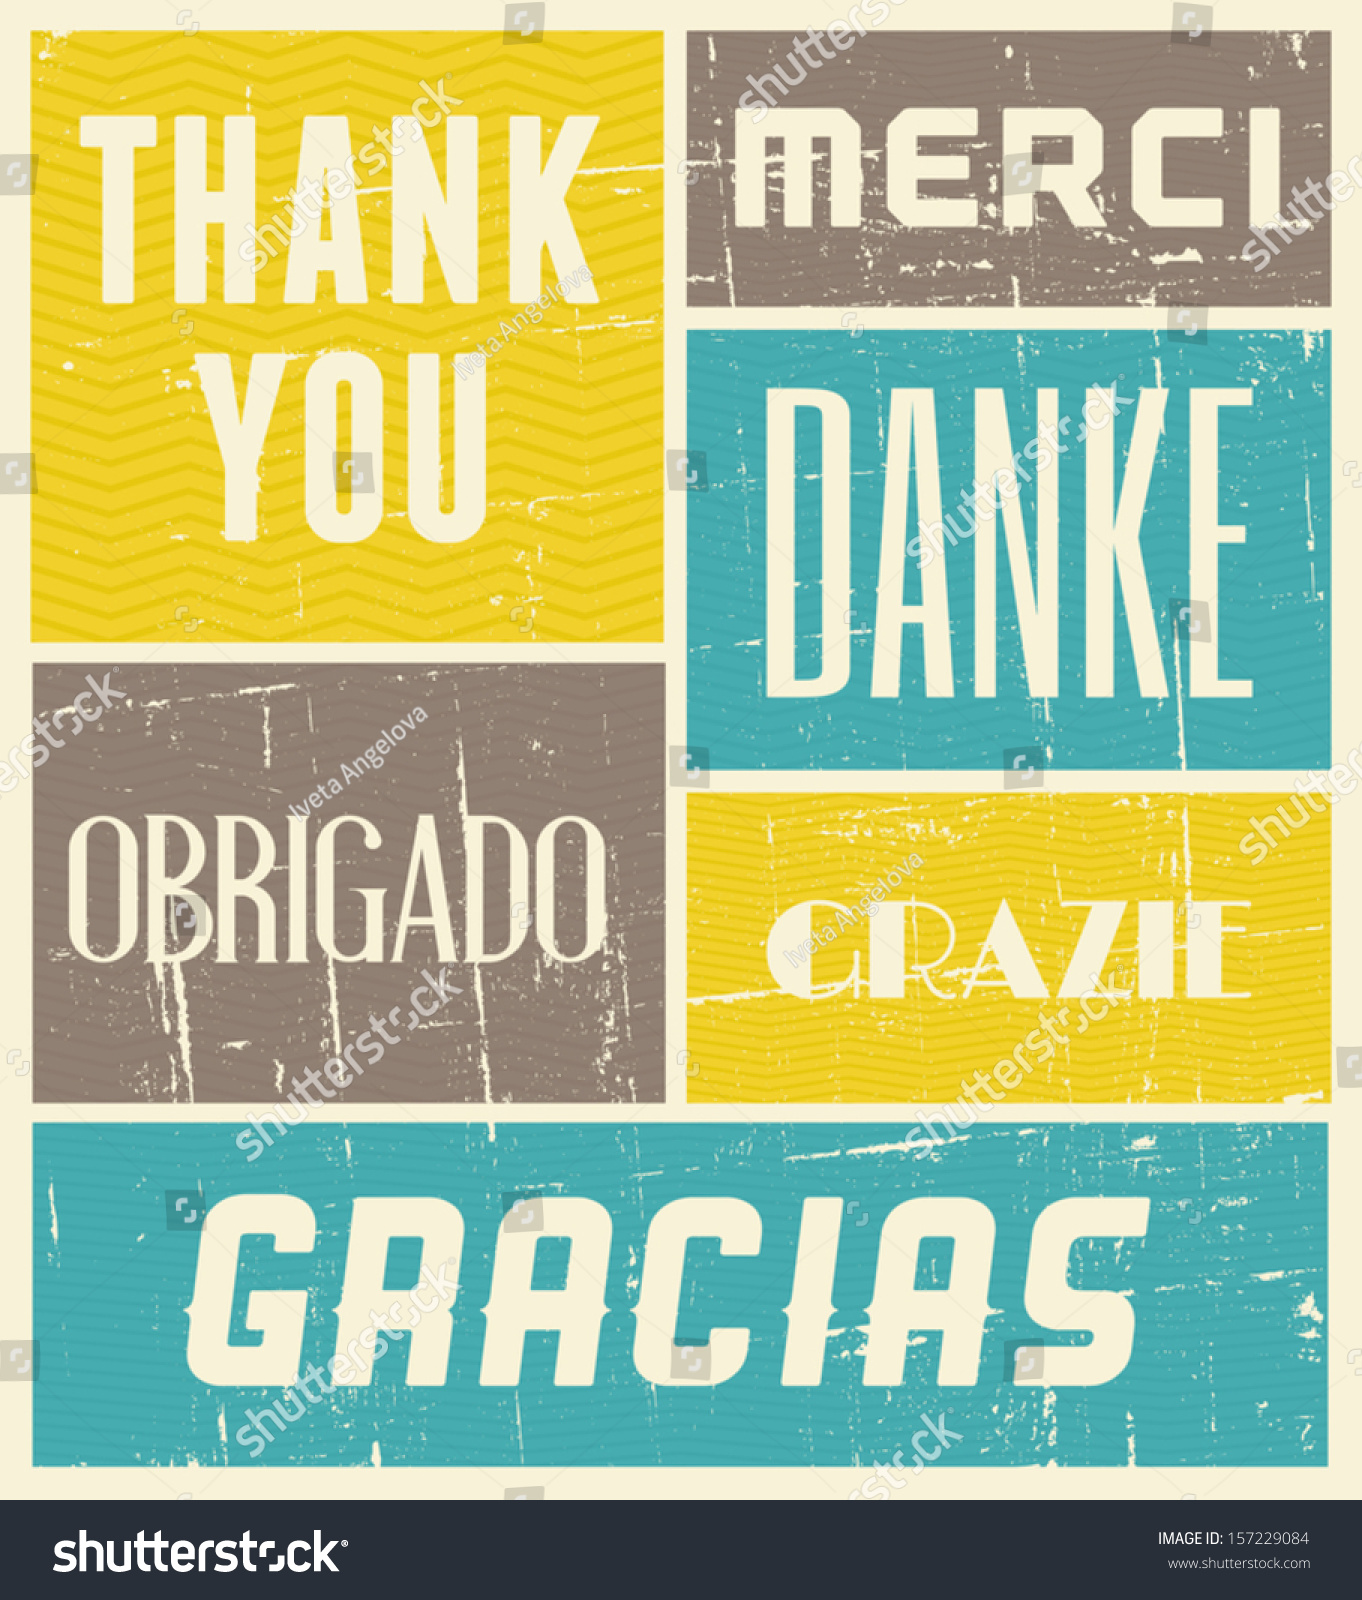 thank you clipart in different languages - photo #48